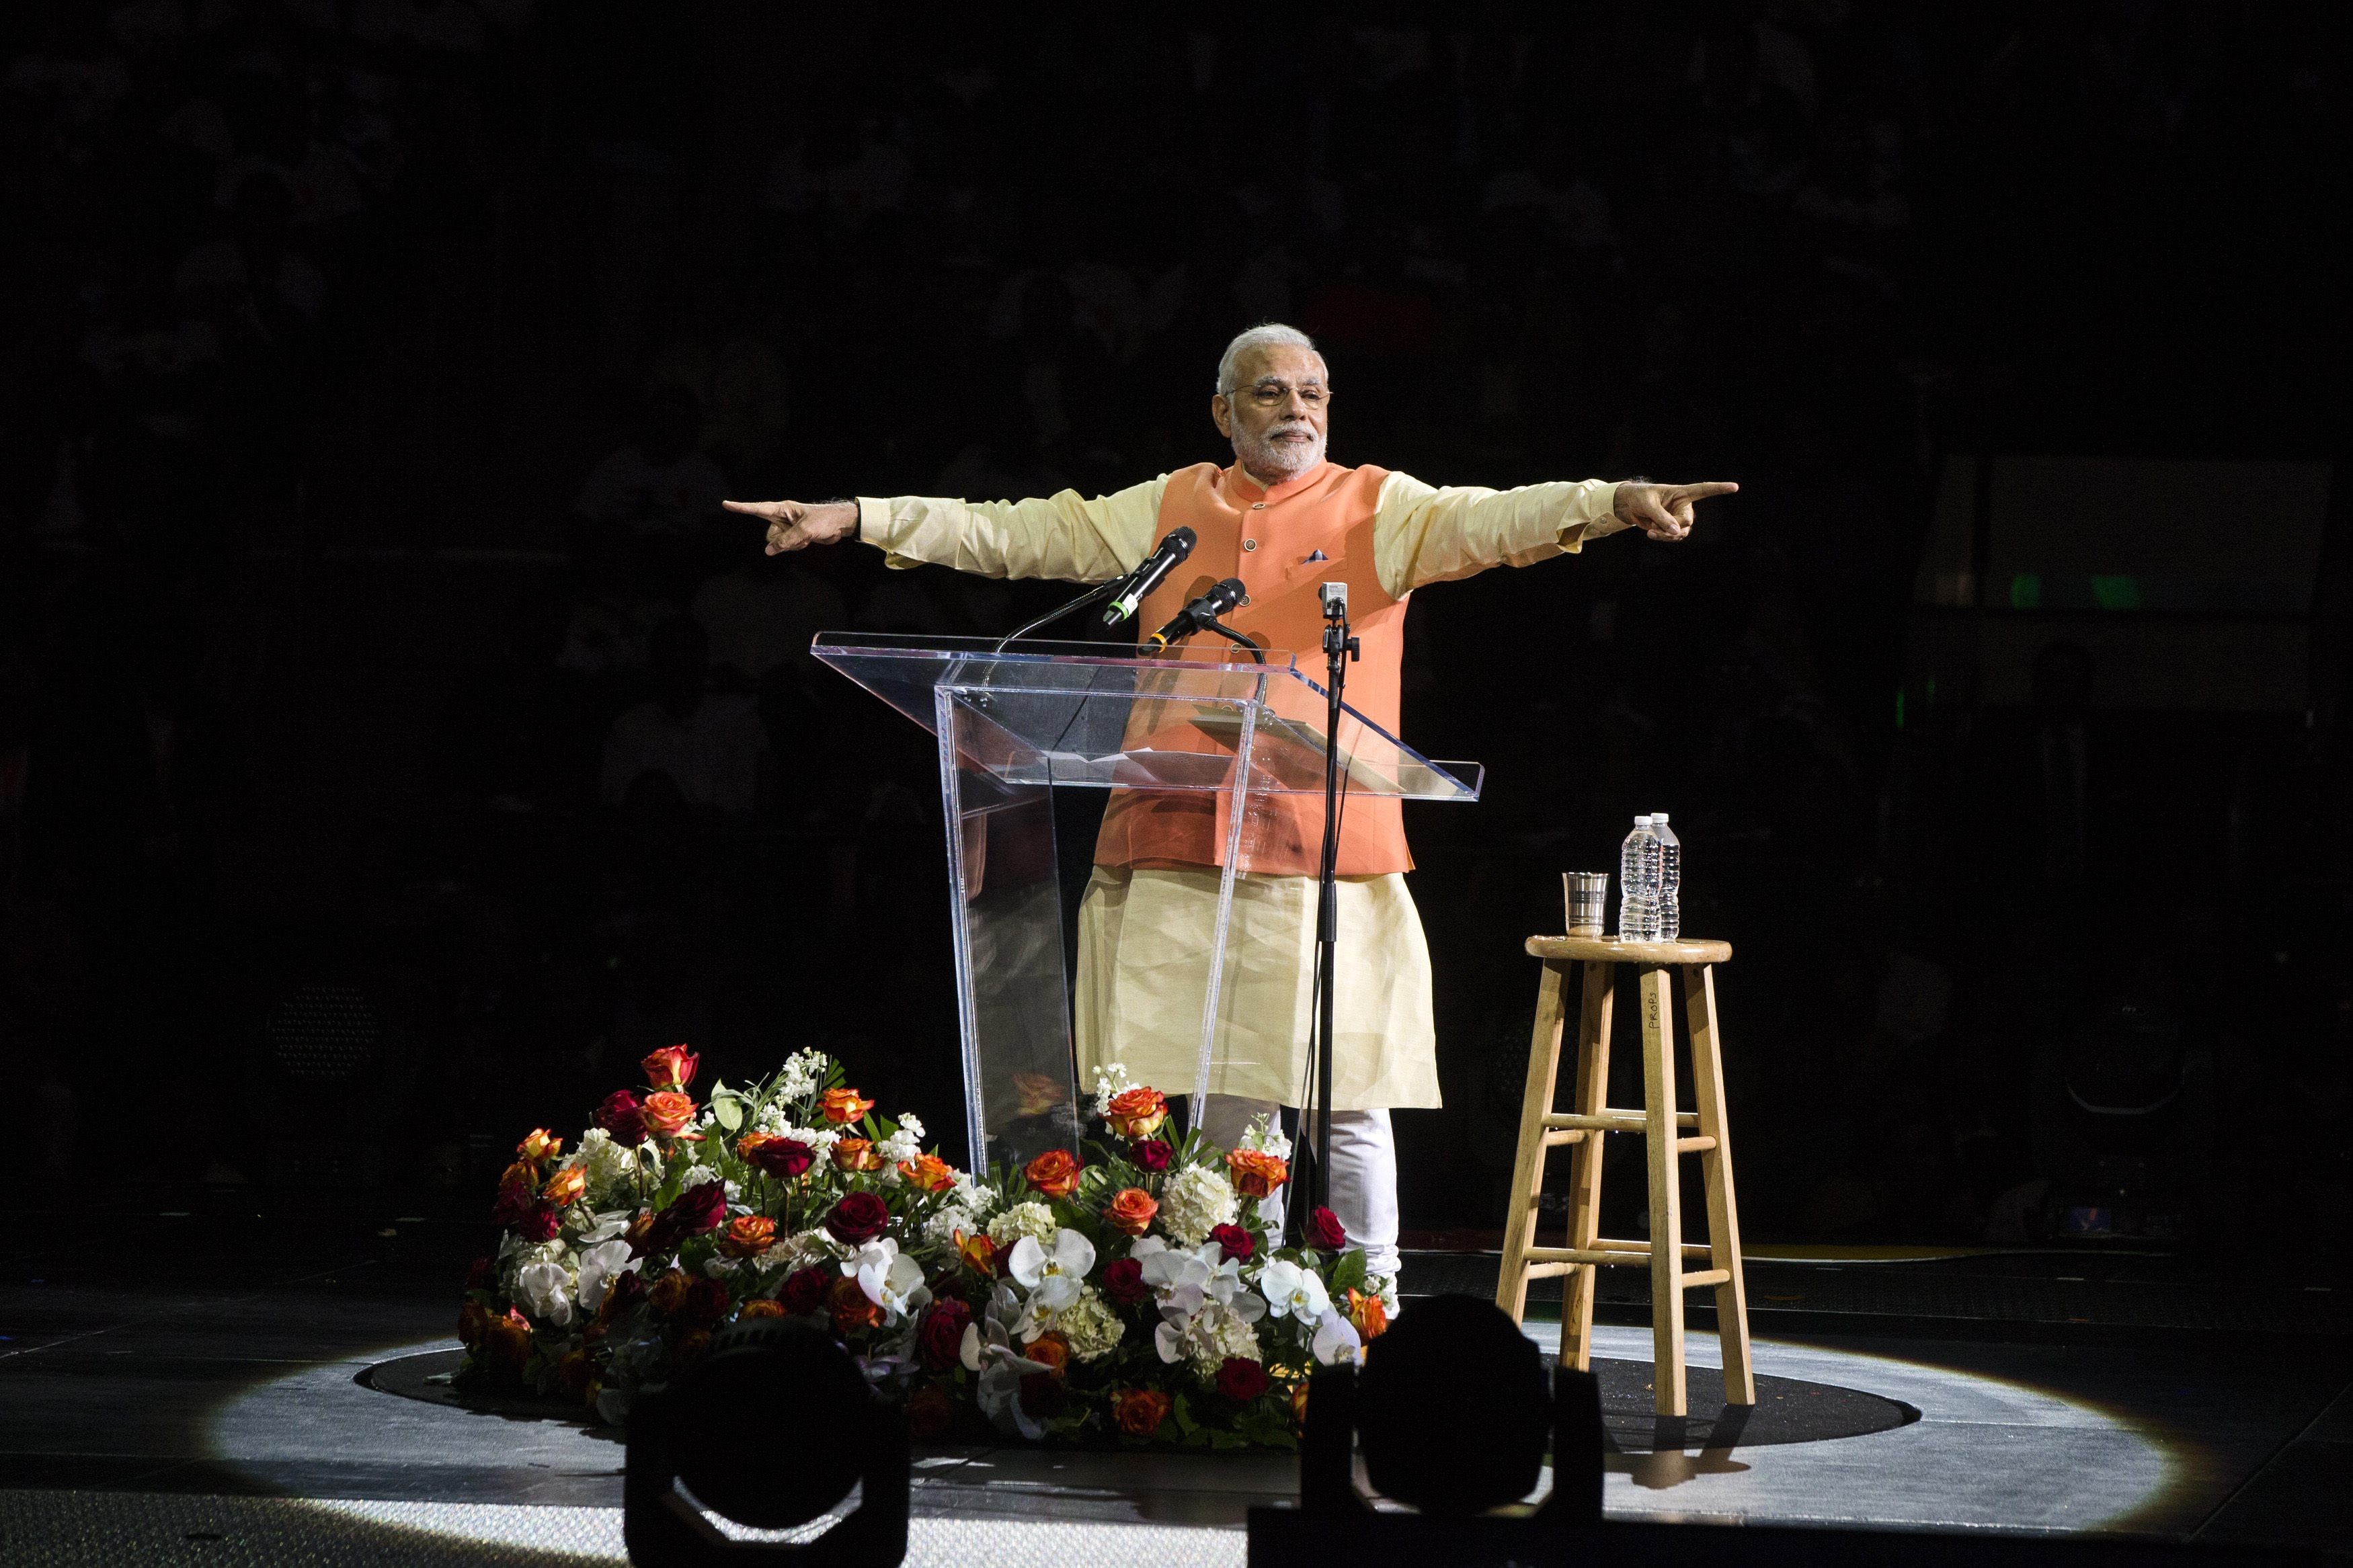 Indian Prime Minister Narendra Modi at Madison Square Garden in New York, during his visit in 2014. Photo: Reuters